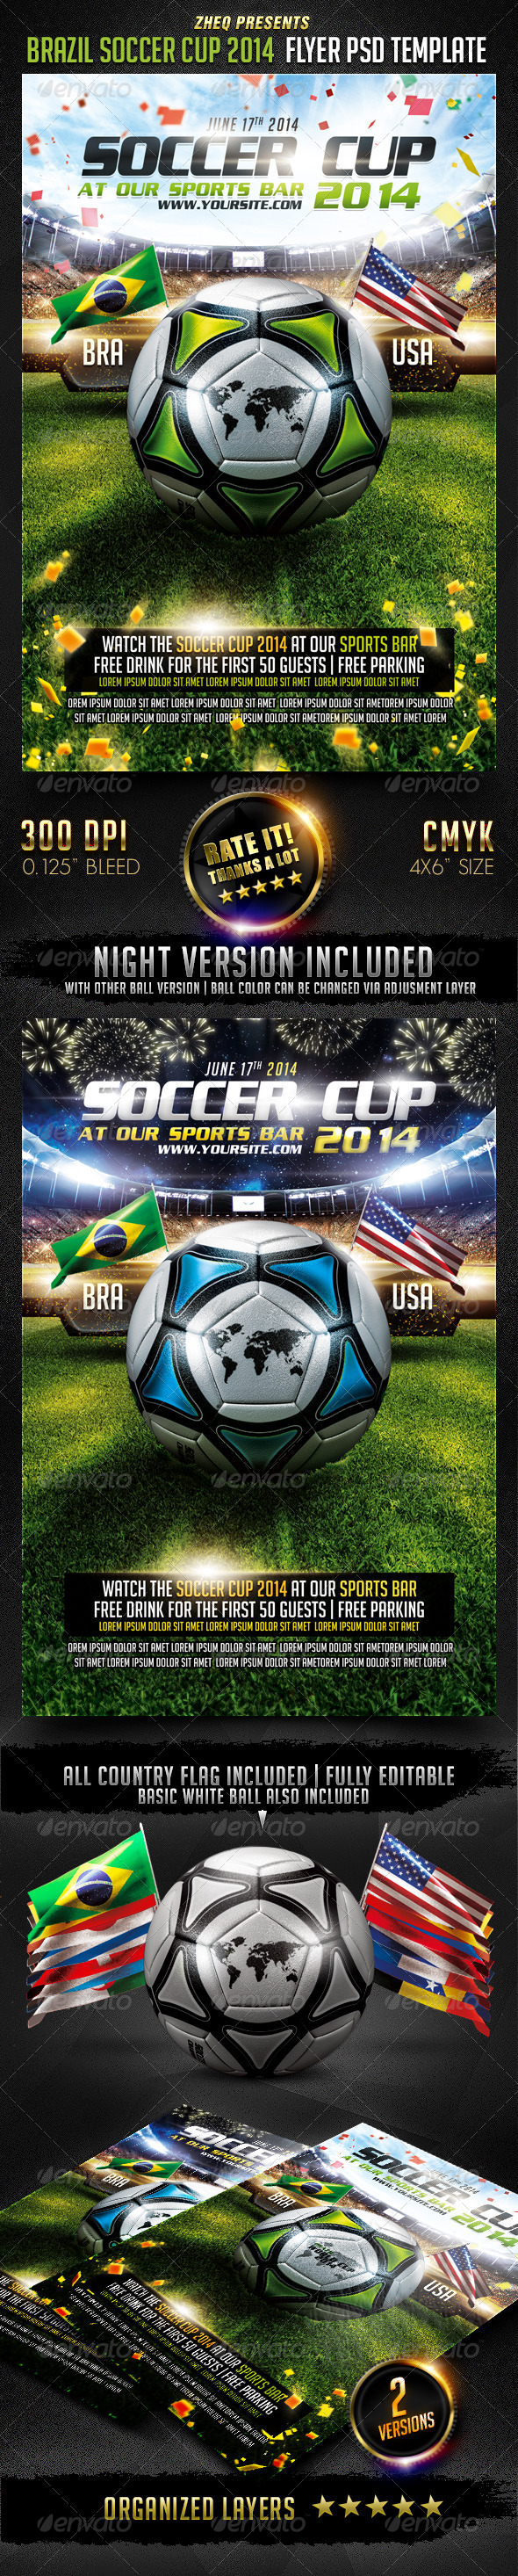 GraphicRiver Brazil Soccer Cup 2014 Flyer Template 7643626